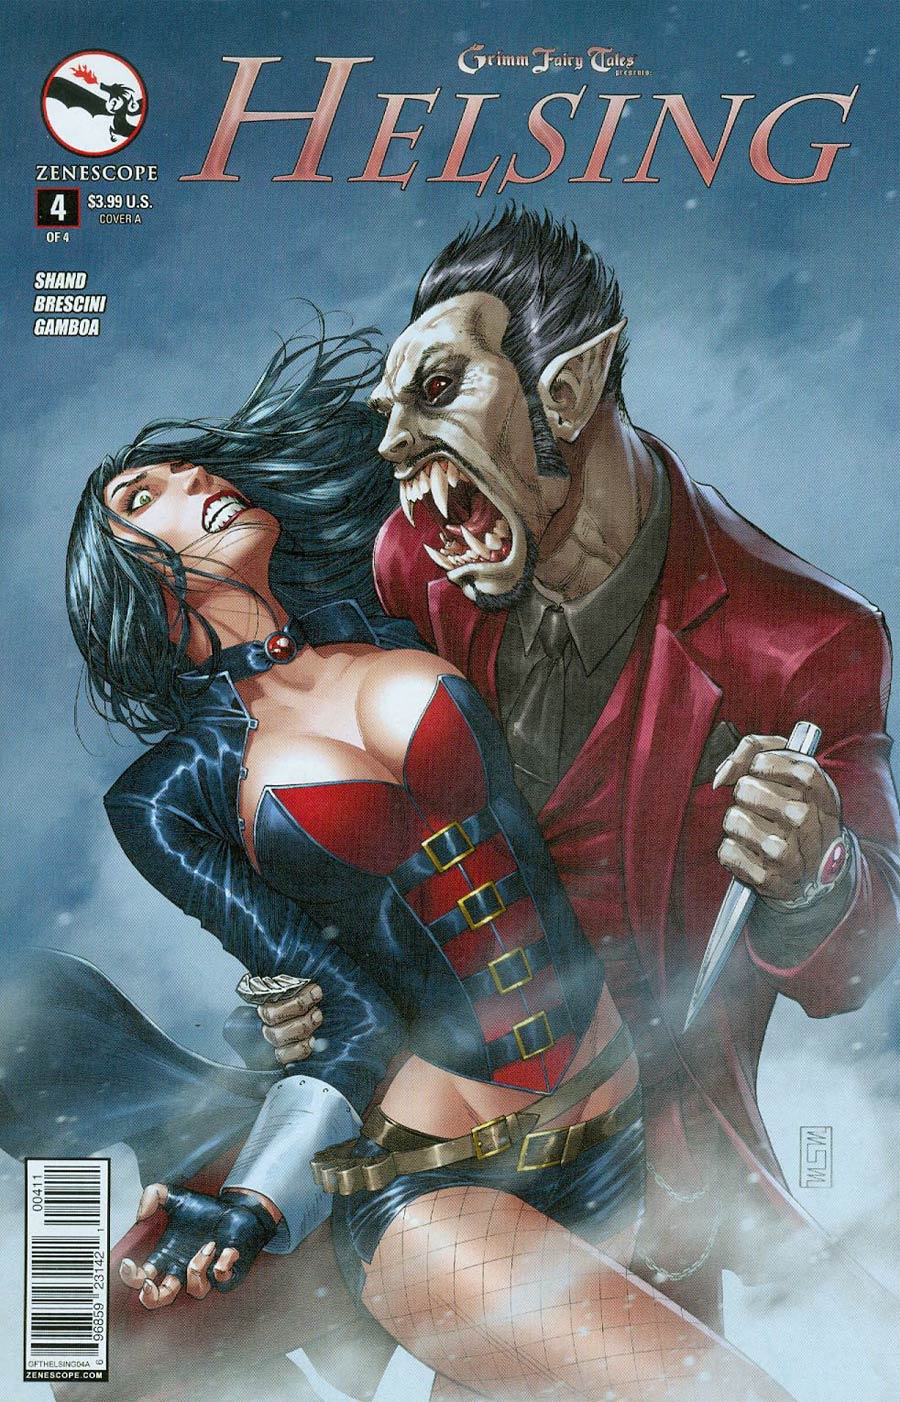 Grimm Fairy Tales Presents Helsing #4 Cover A Mike S Miller